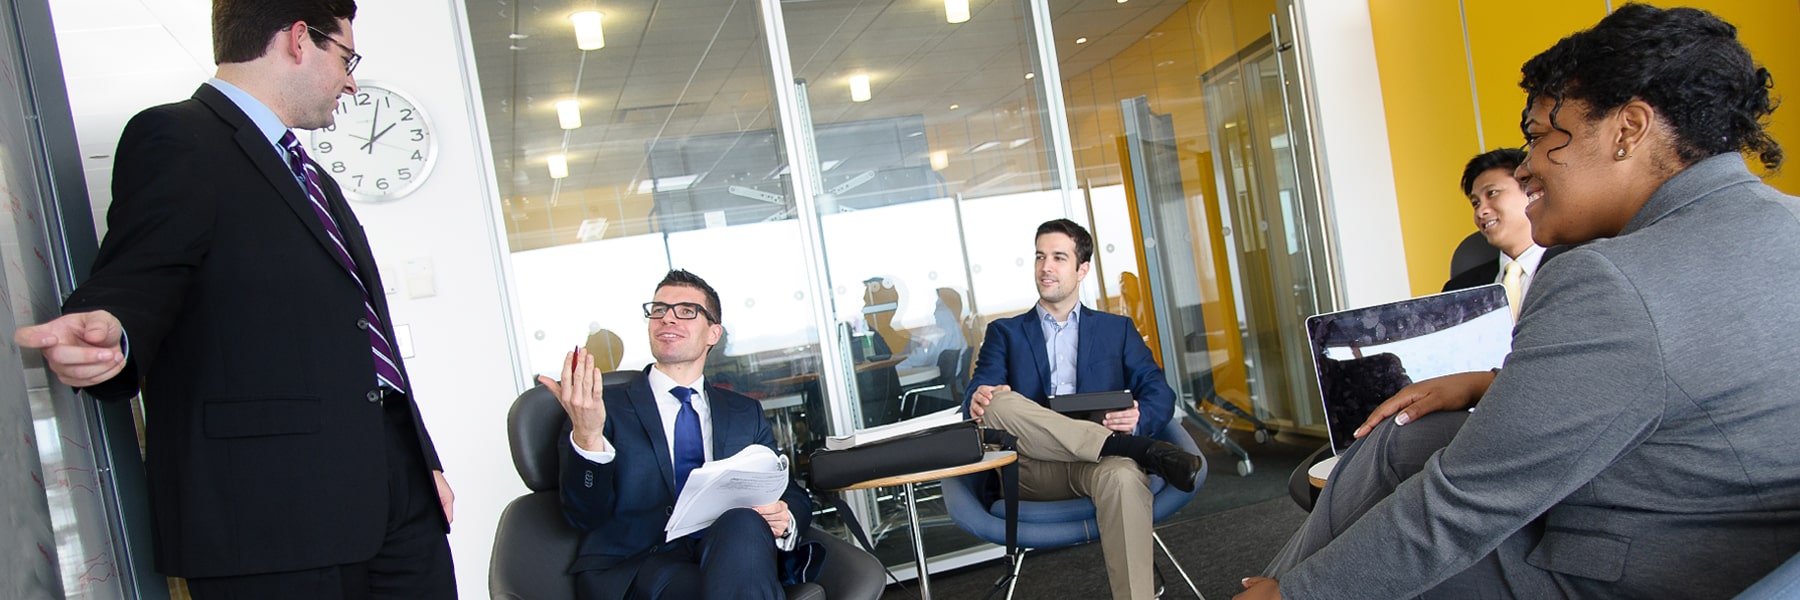 people in business suits talking in the UMass Boston Venture Development Center